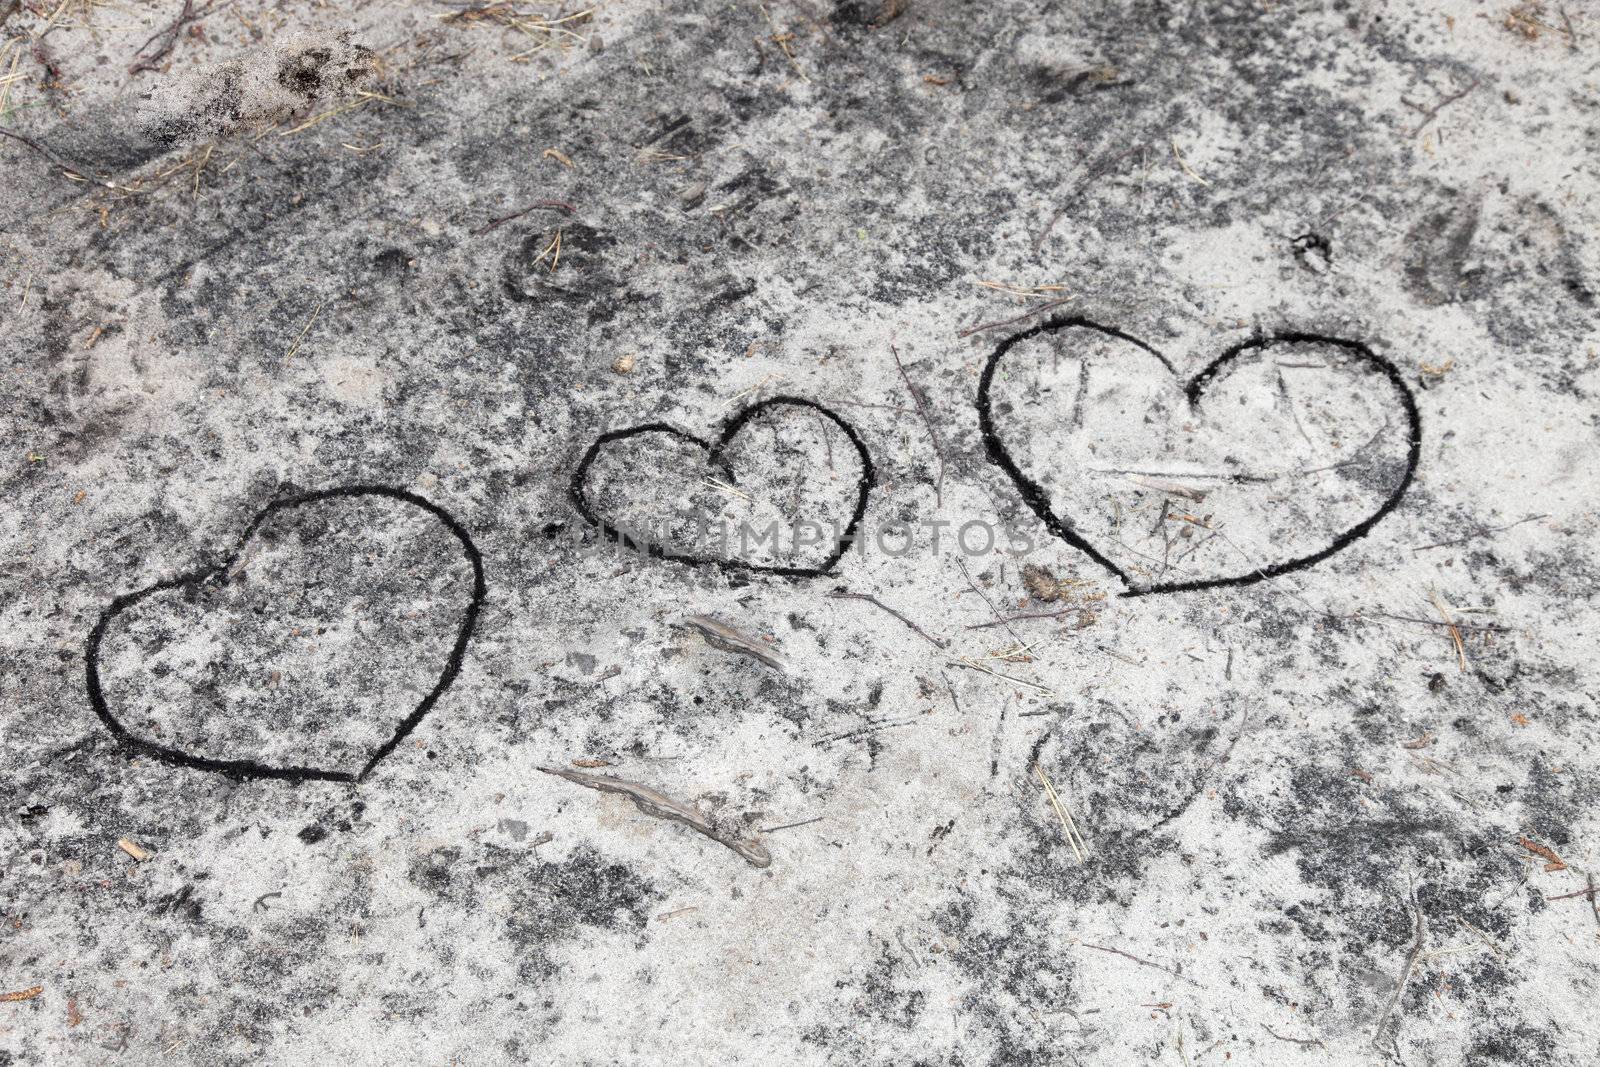 Three Hearts - painted in the sand  by Farina6000